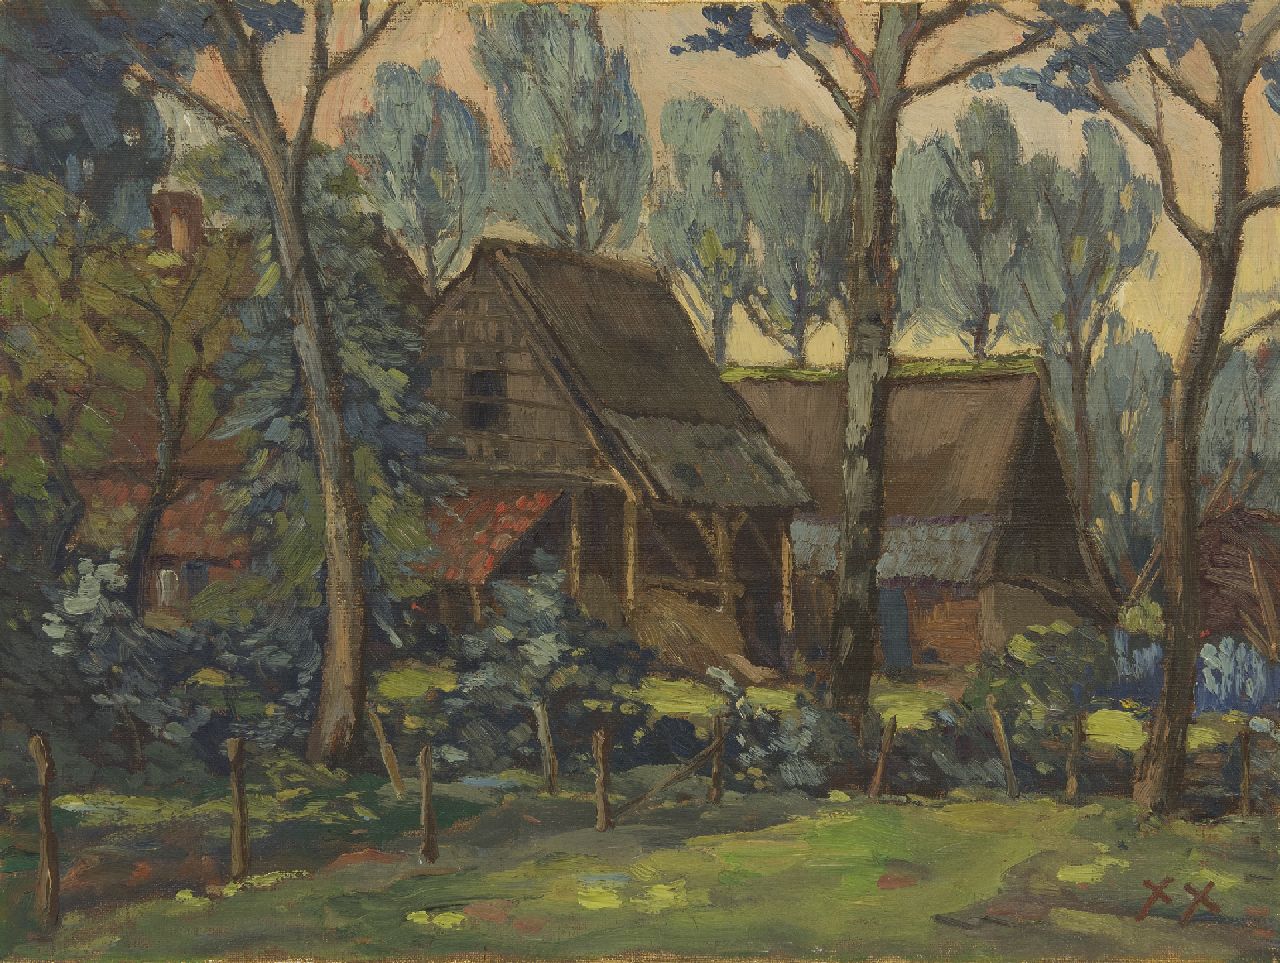 Kruysen J.  | Johannes 'Jan' Kruysen | Paintings offered for sale | Farmyard, oil on canvas 45.2 x 60.3 cm, signed l.r. with monogram